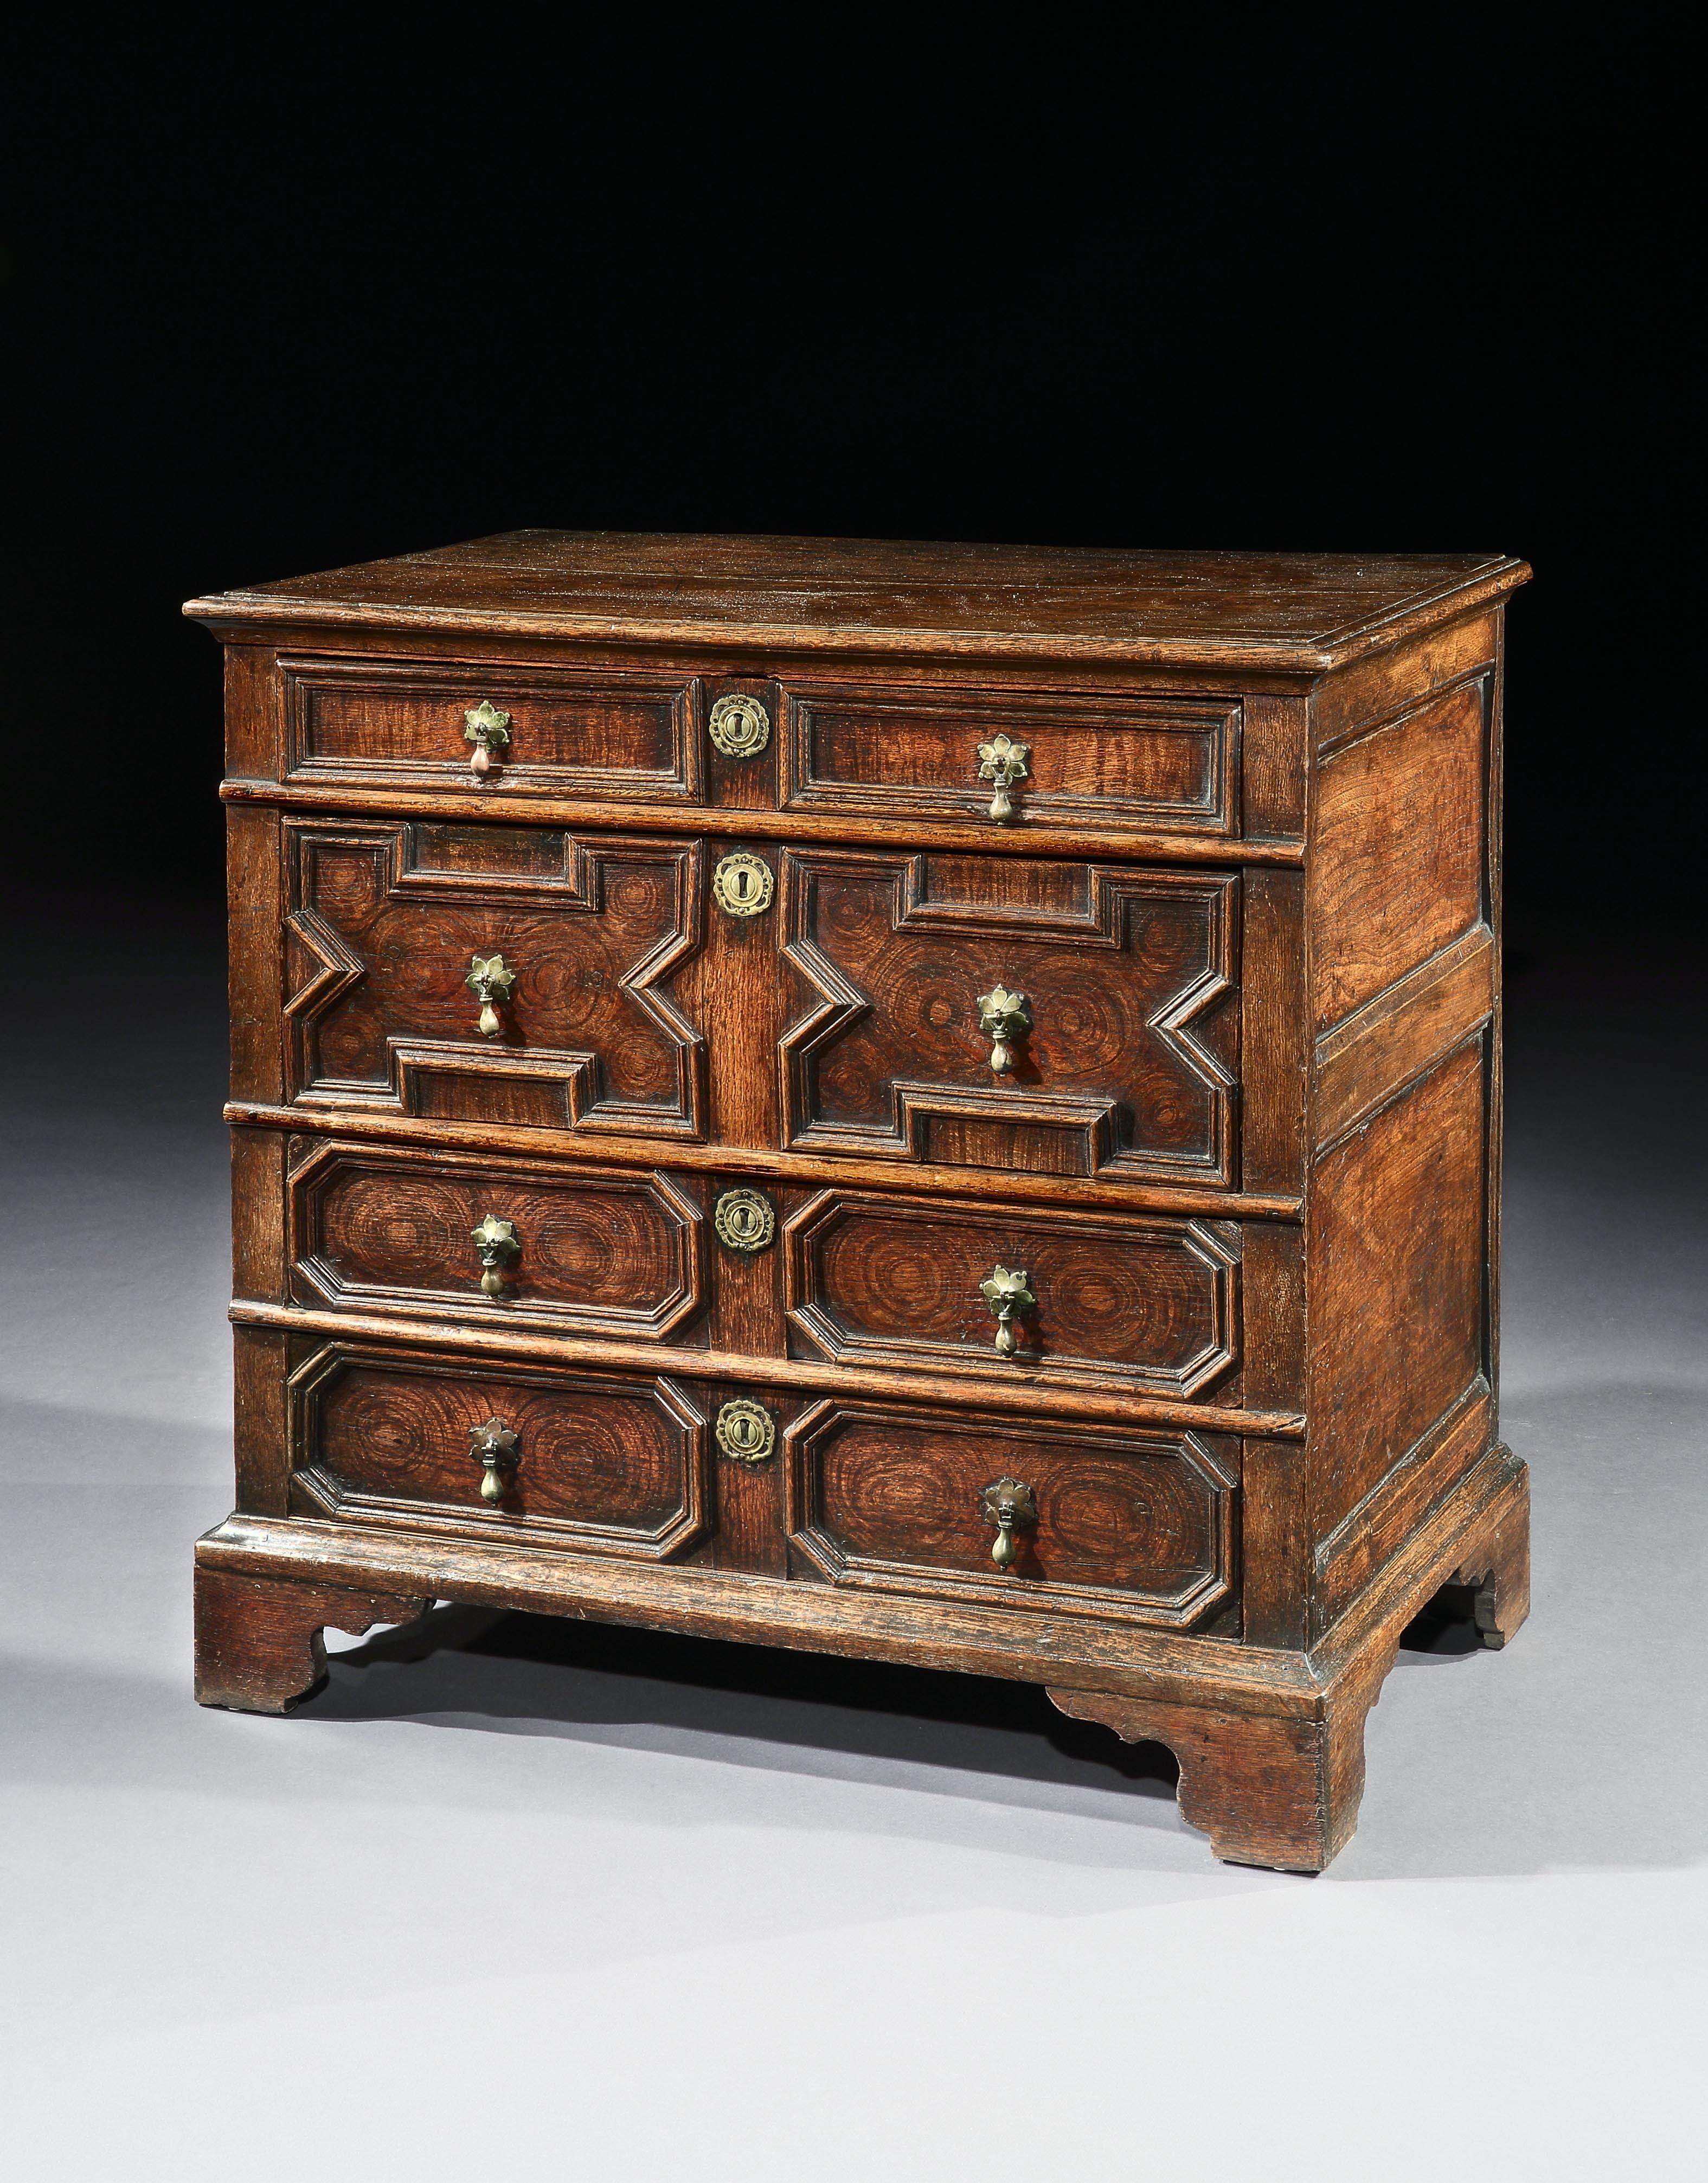 An exceptionally rare, English, vernacular 17th century elm chest of drawers with wood grain decoration imitating oyster veneers

Wood graining was used in elite interiors during the Baroque period at the end of the 17th primarily to give the